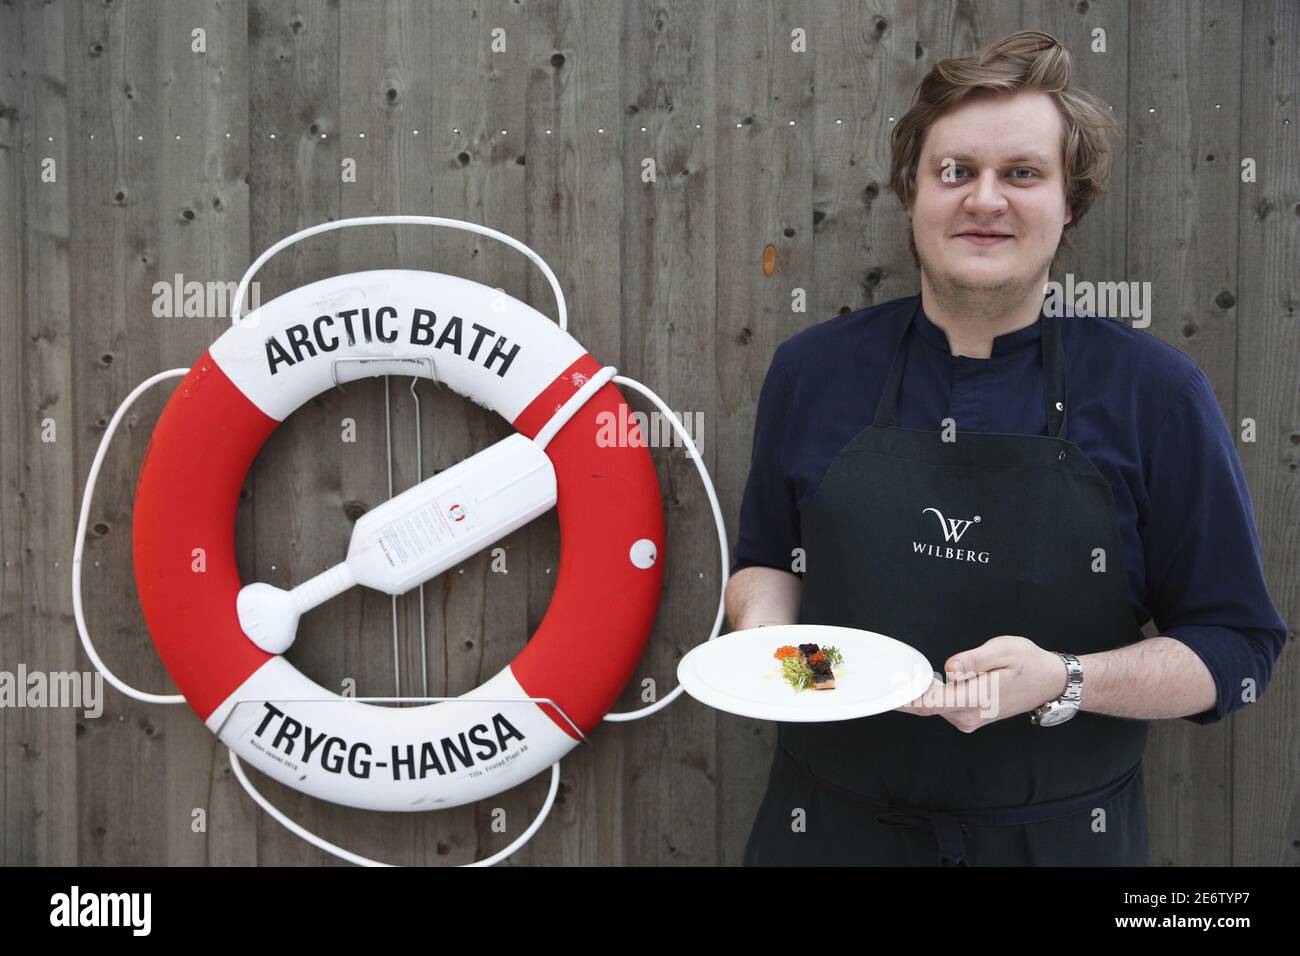 Sweden, Lapland, Norrbotten County, Harads, David Staf, the chef of the Arctic bath hotel presenting a dish of salmon in front of a buoy placed on a wooden wall Stock Photo